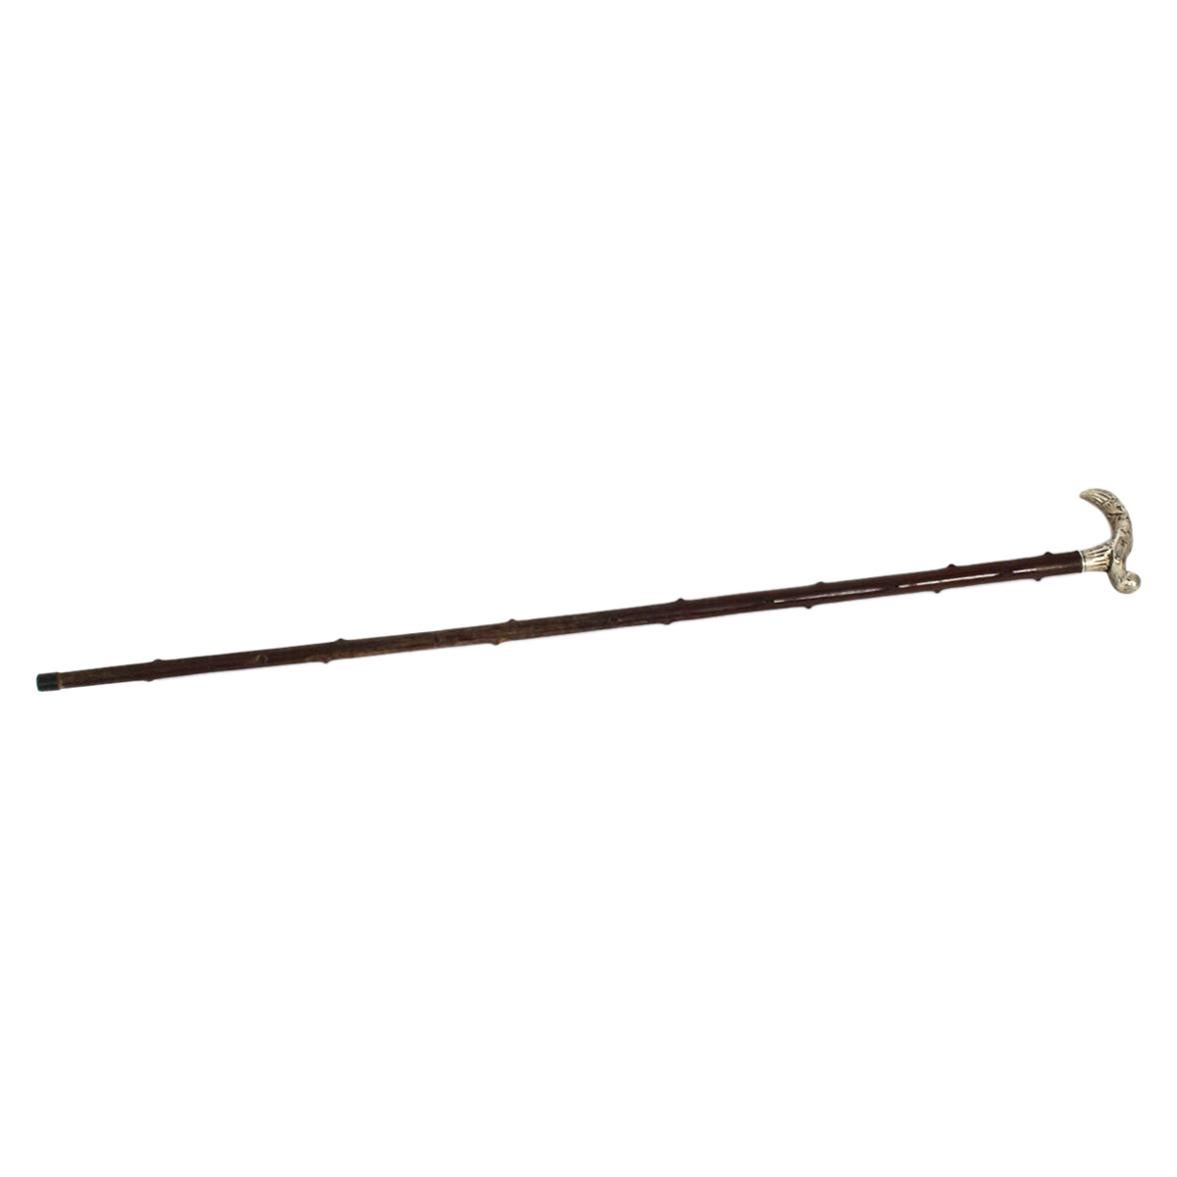 Antique Silver Plated Walking Cane Stick, 19th Century